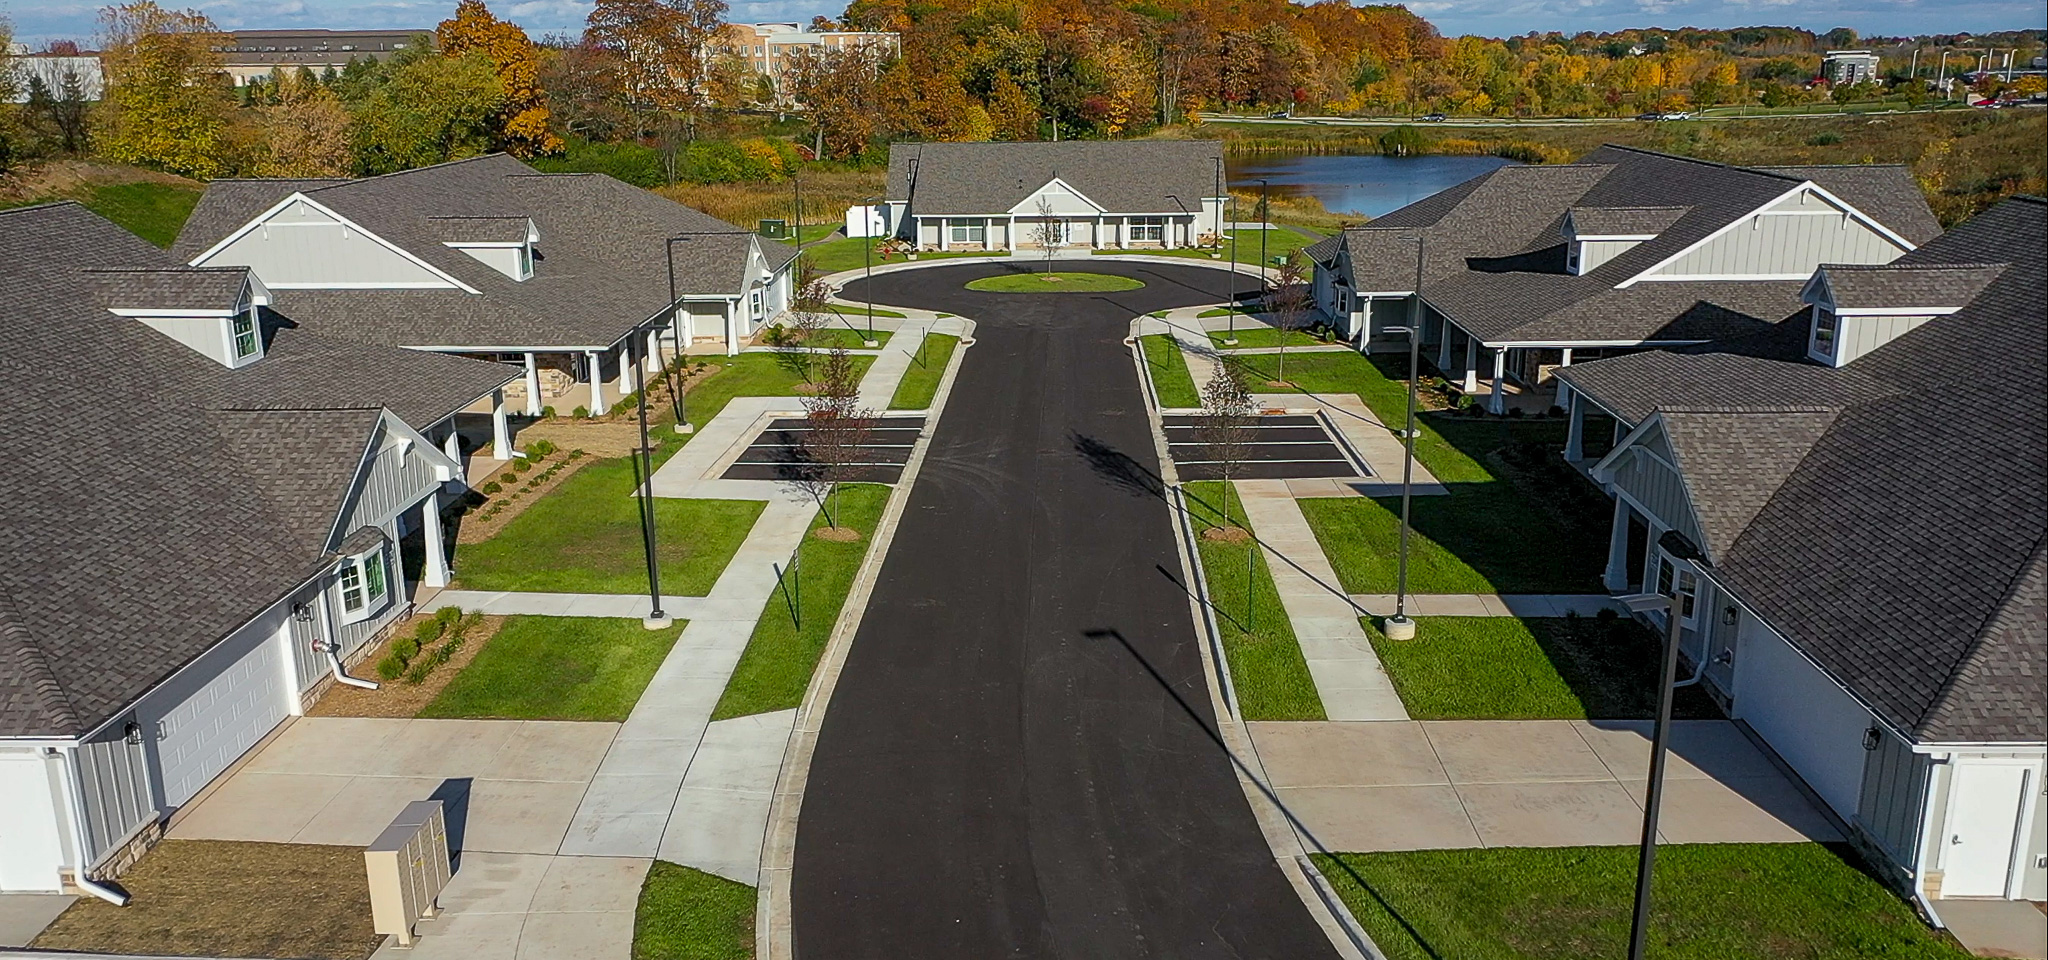 McShane Completes Community for Adults with Autism in Wisconsin